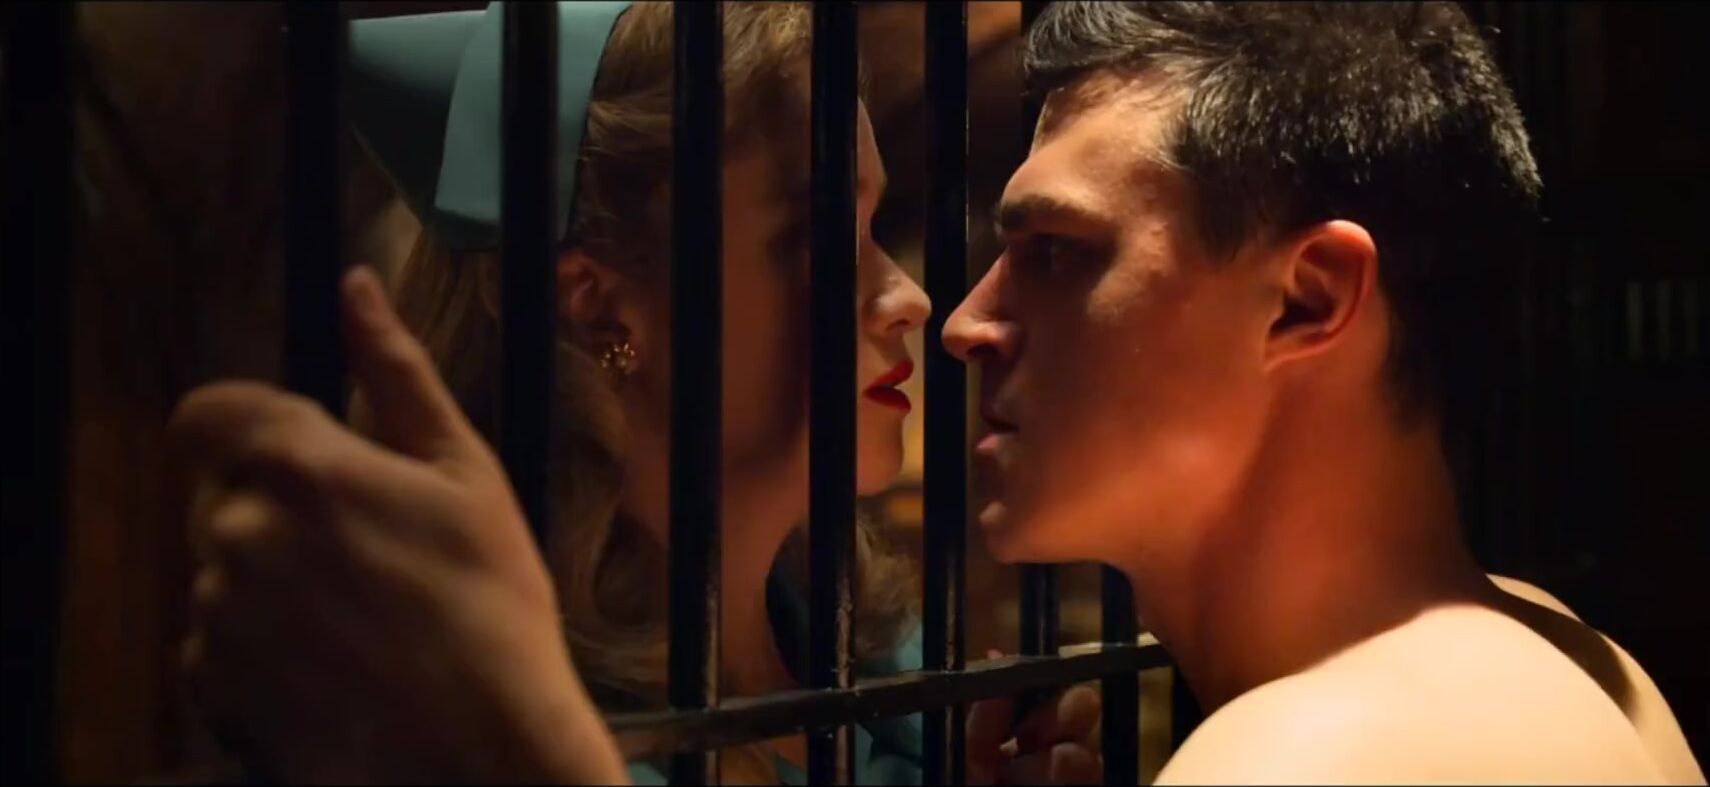 Passion Alice Englert can't resist caged boy and goes jerking him off in TV series Ratched Tight Cunt